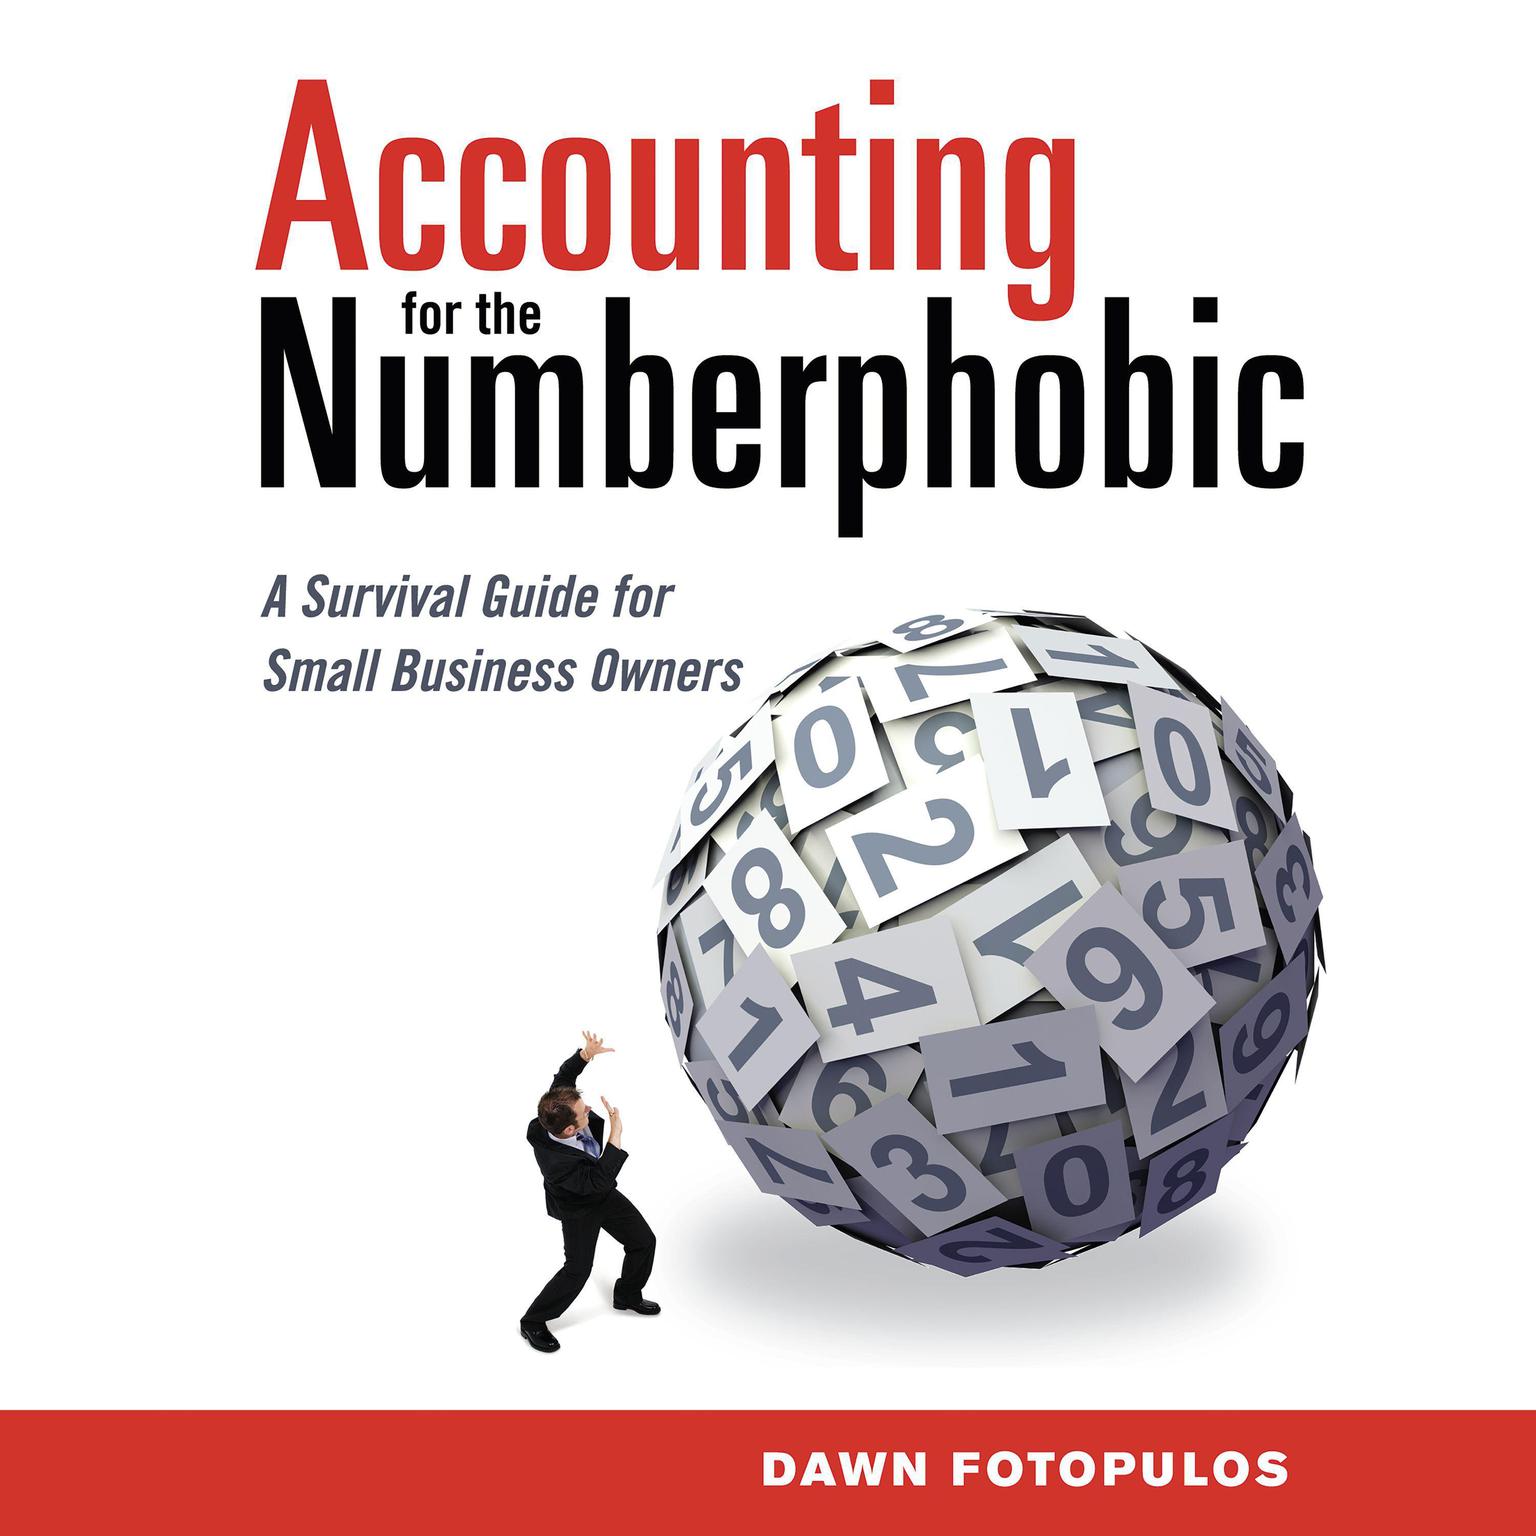 Accounting for the Numberphobic: A Survival Guide for Small Business Owners Audiobook, by Dawn Fotopulos